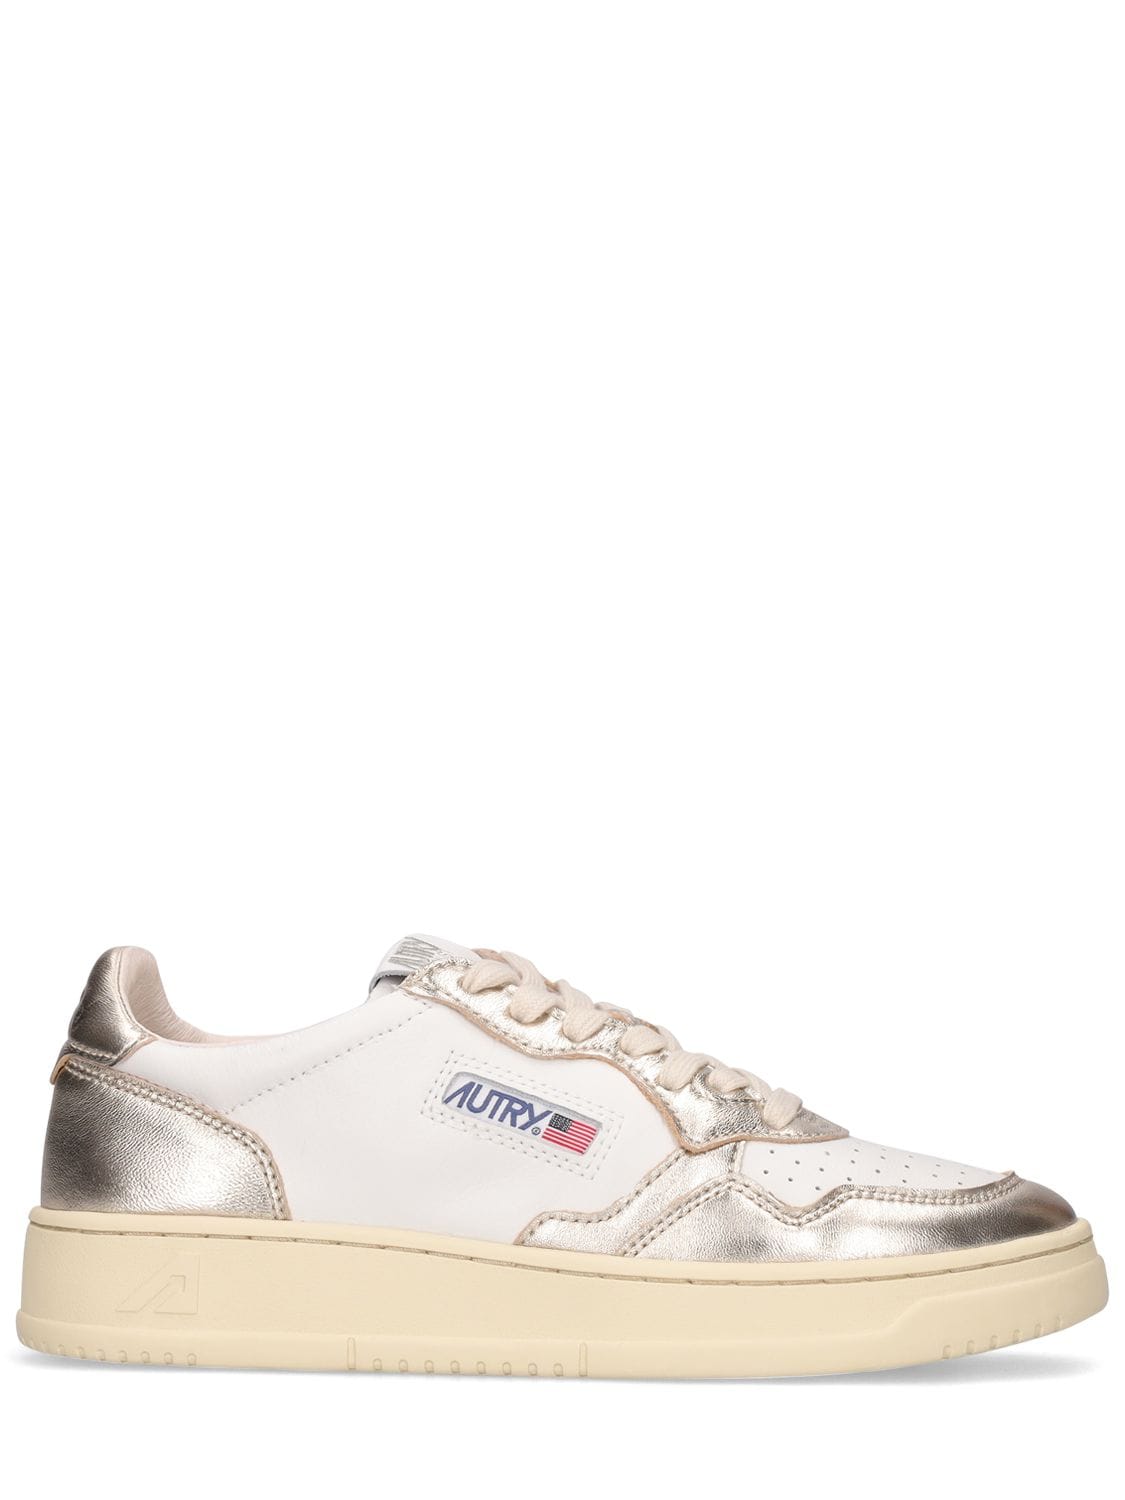 Autry 35mm Medalist Low Sneakers In White,gold | ModeSens